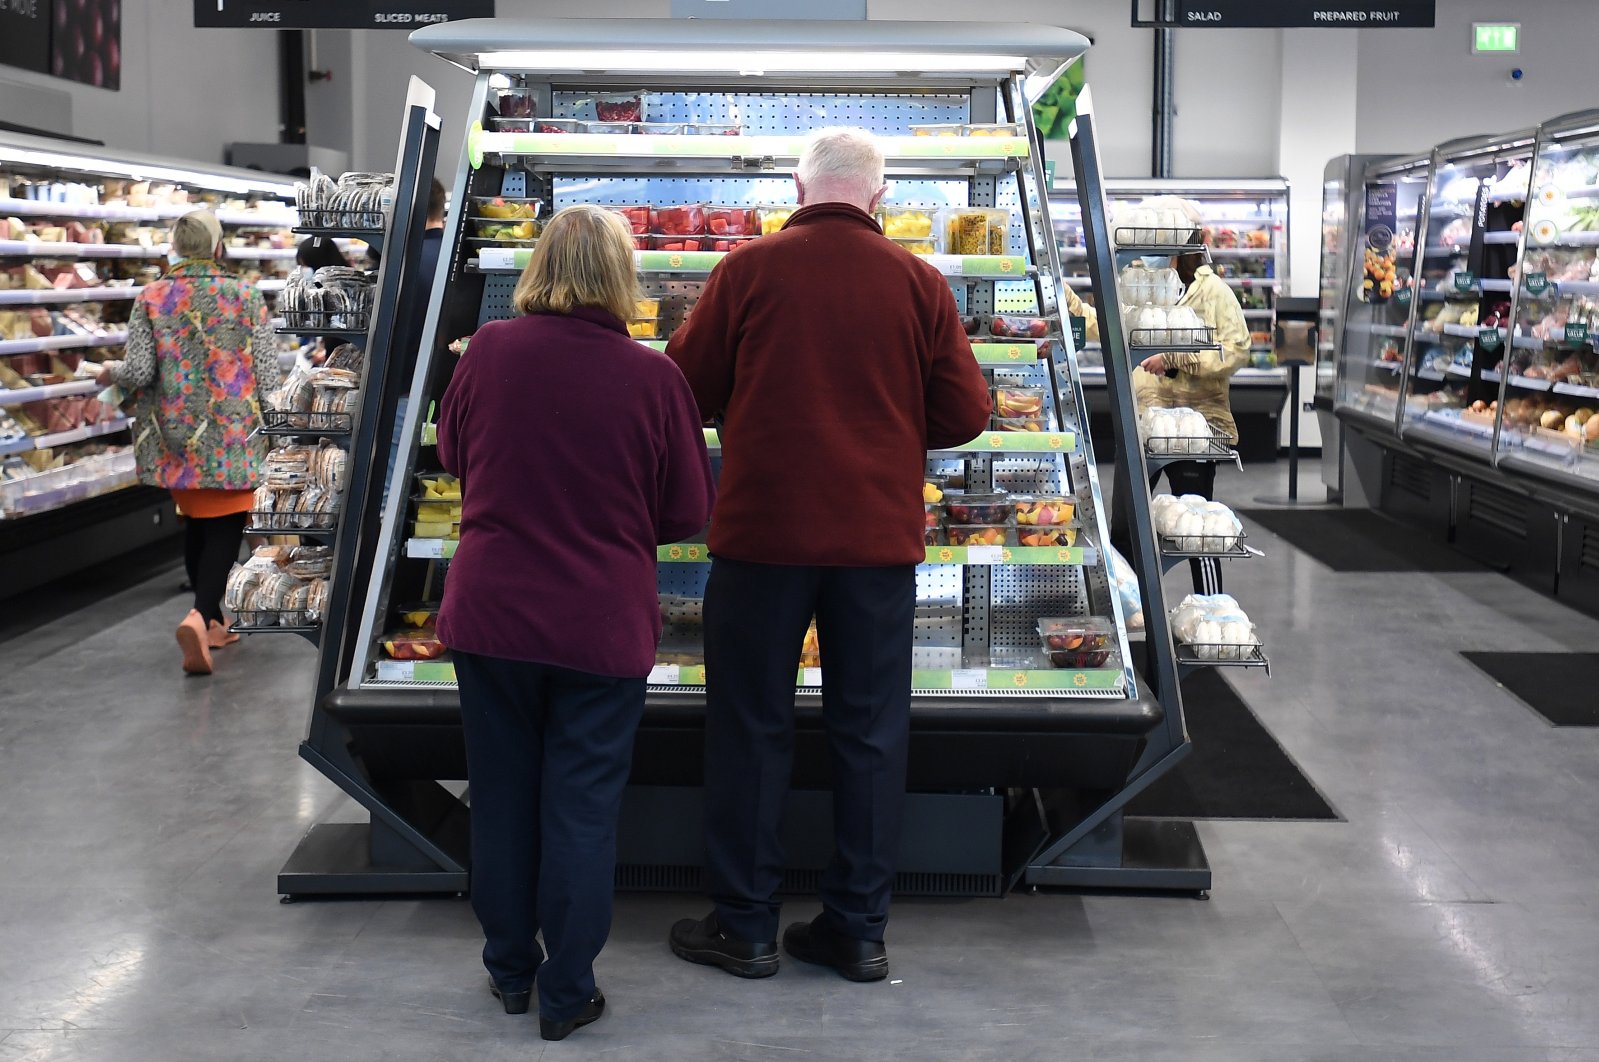 Shoppers are seen at a supermarket in London, Britain, April 13, 2022. (EPA Photo)